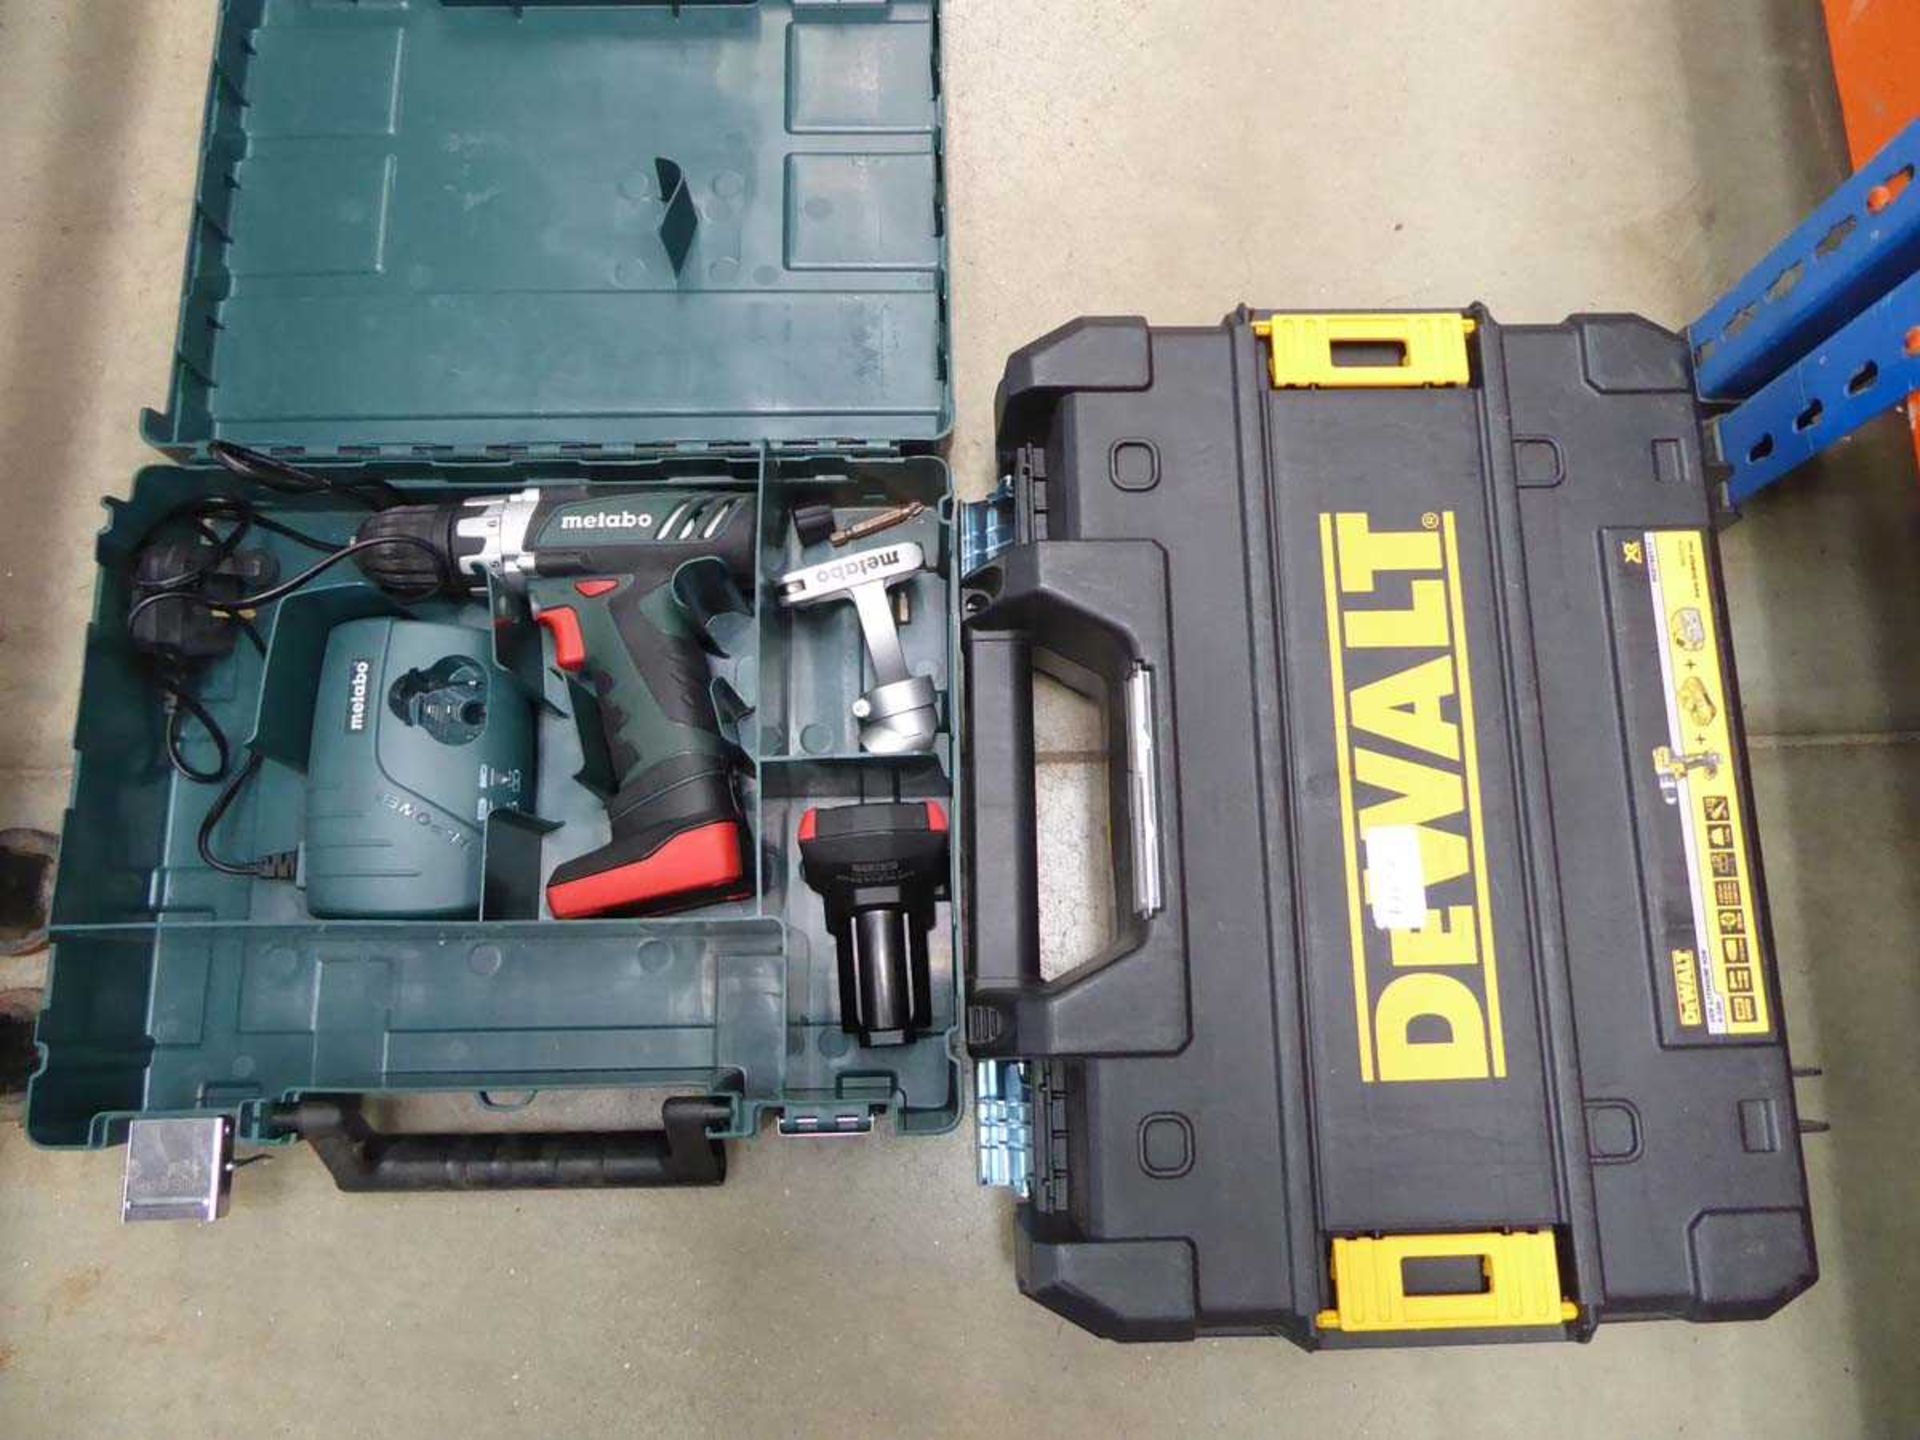 Metabo battery drill with 2 batteries and charger; and empty Dewalt toolcase